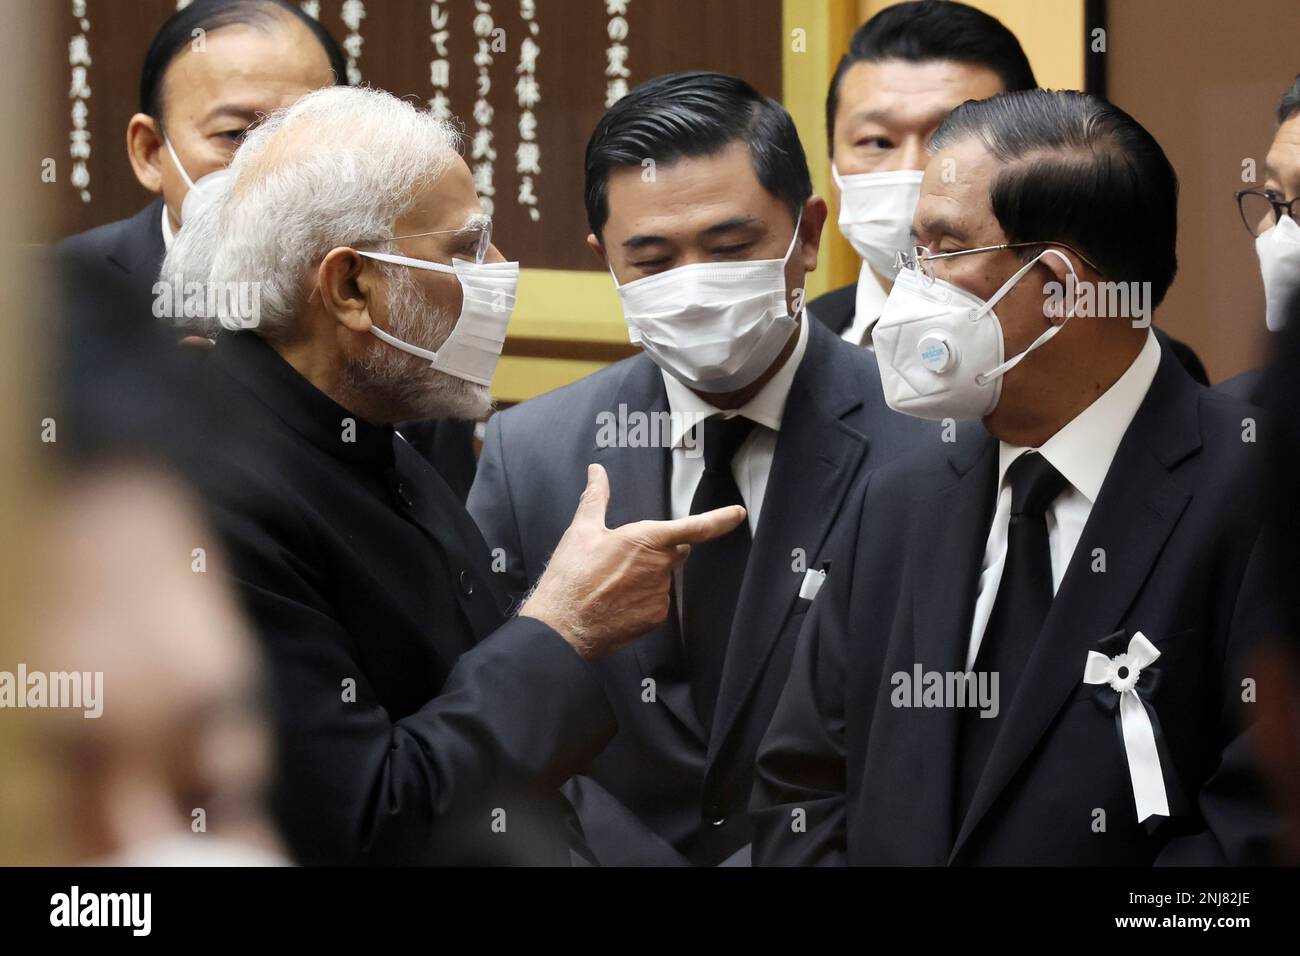 Indian Prime Minister Narendra Modi, left, speaks with his Cambodian  counterpart Hun Sen after they attended the state funeral for former Prime  Minister Shinzo Abe, the longest-serving leader in his nation's modern